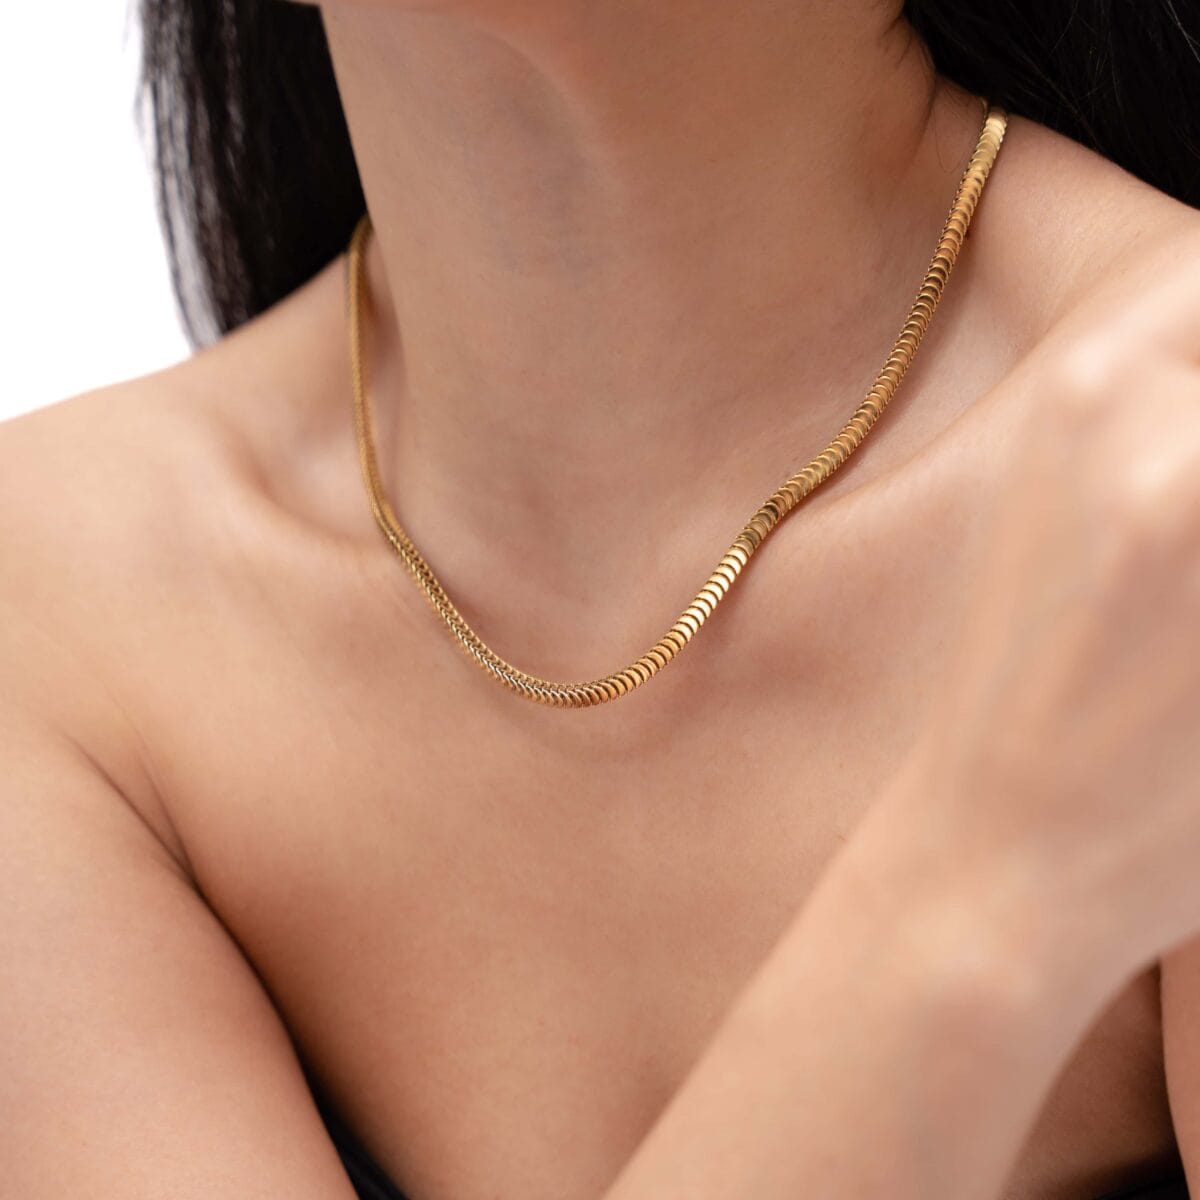 https://m.clubbella.co/product/gold-pleated-chain-statement-necklace/ DSC09340